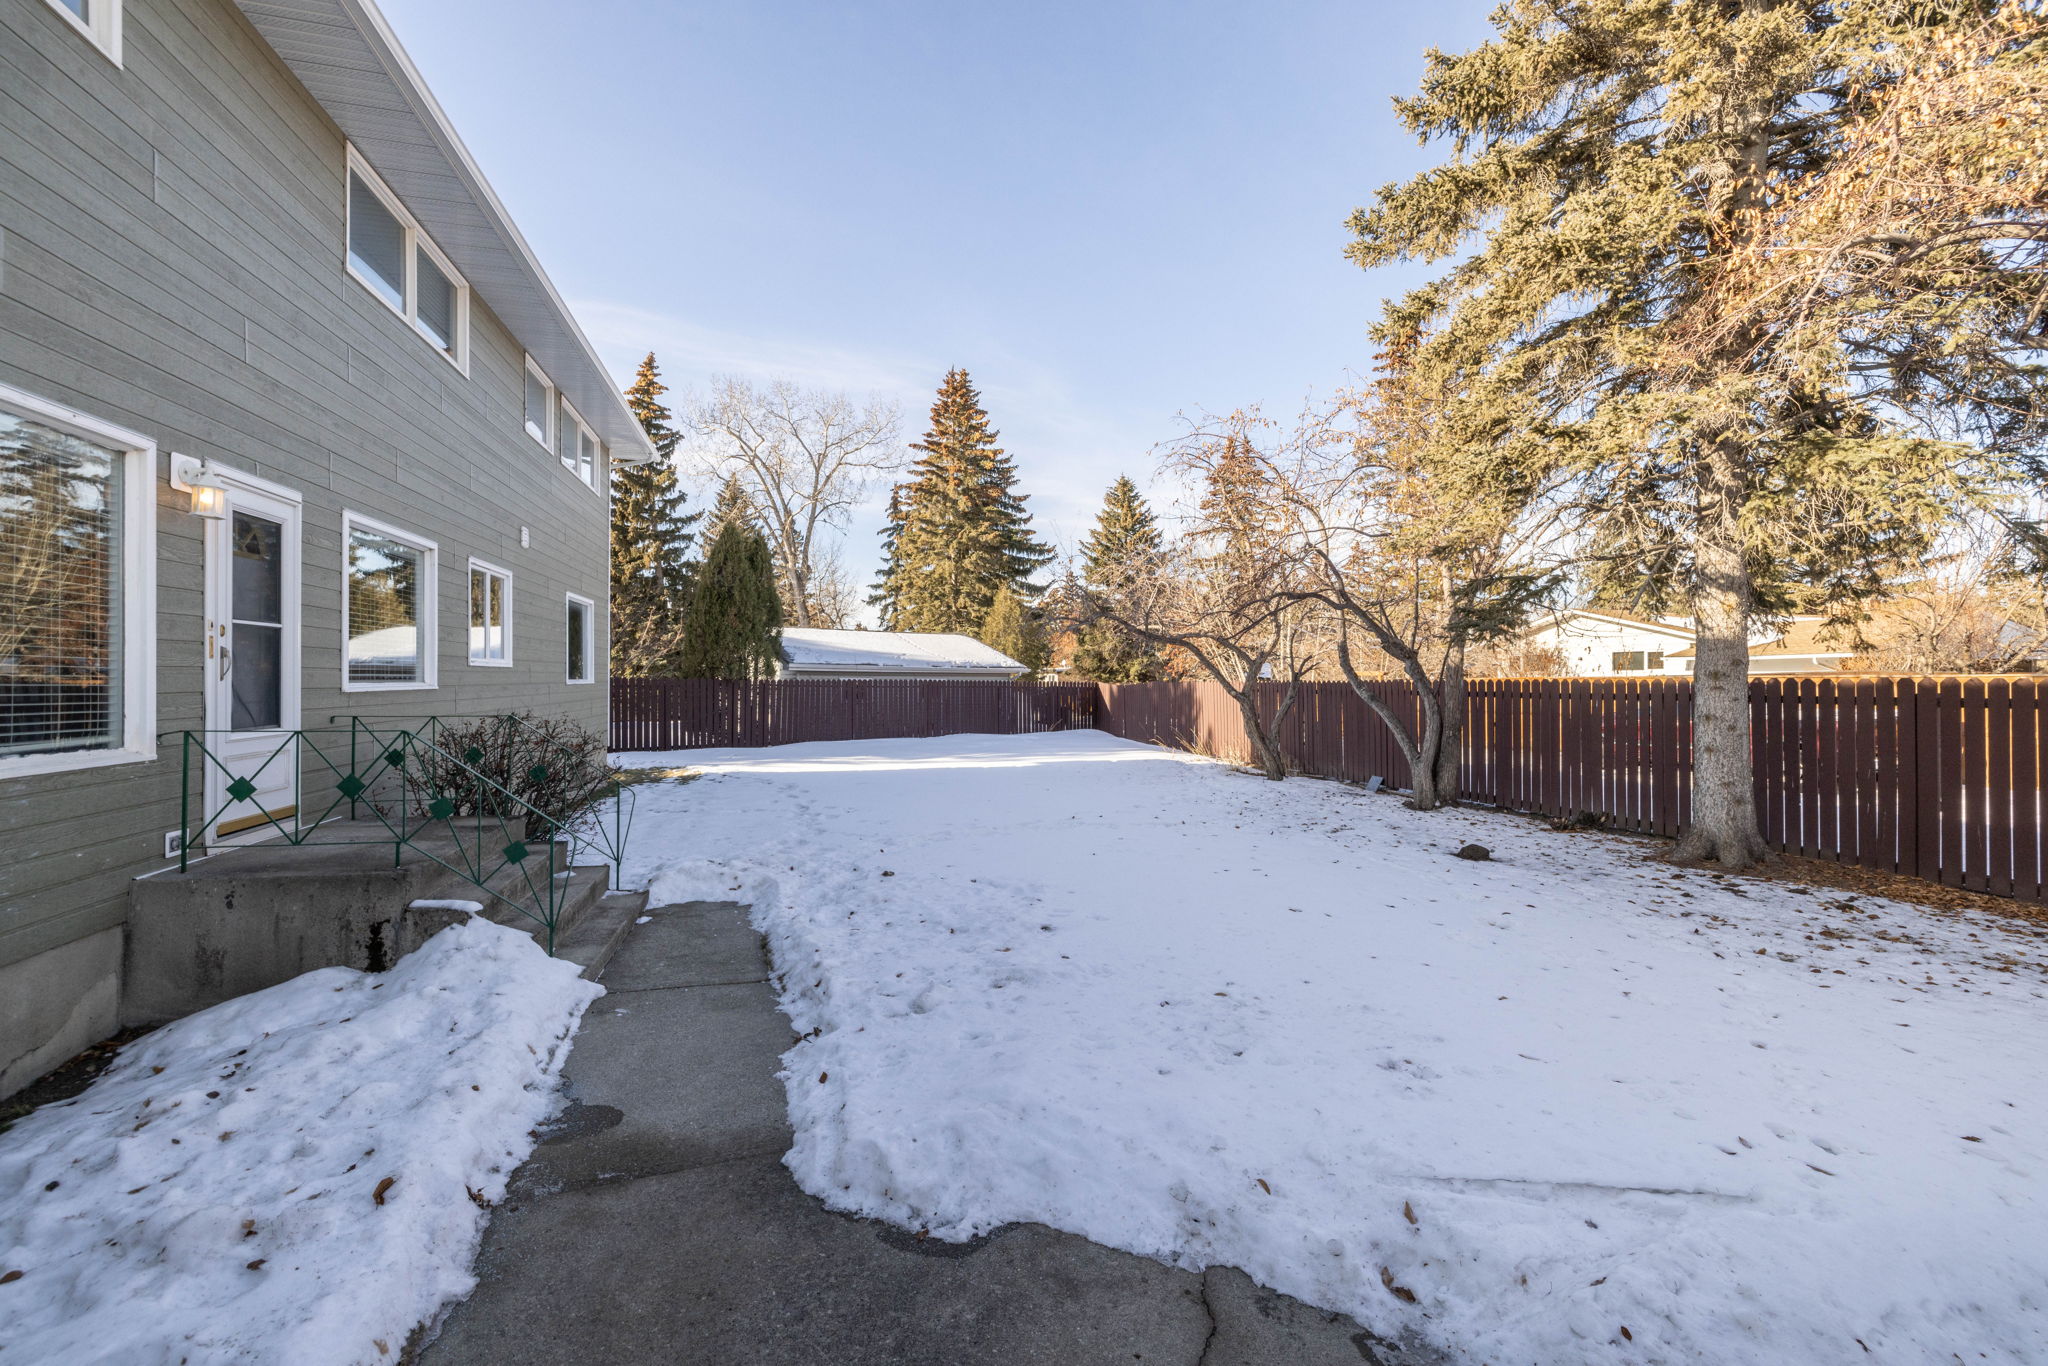 3224 Uplands Pl NW, Calgary, AB T2N 4H1, Canada Photo 72